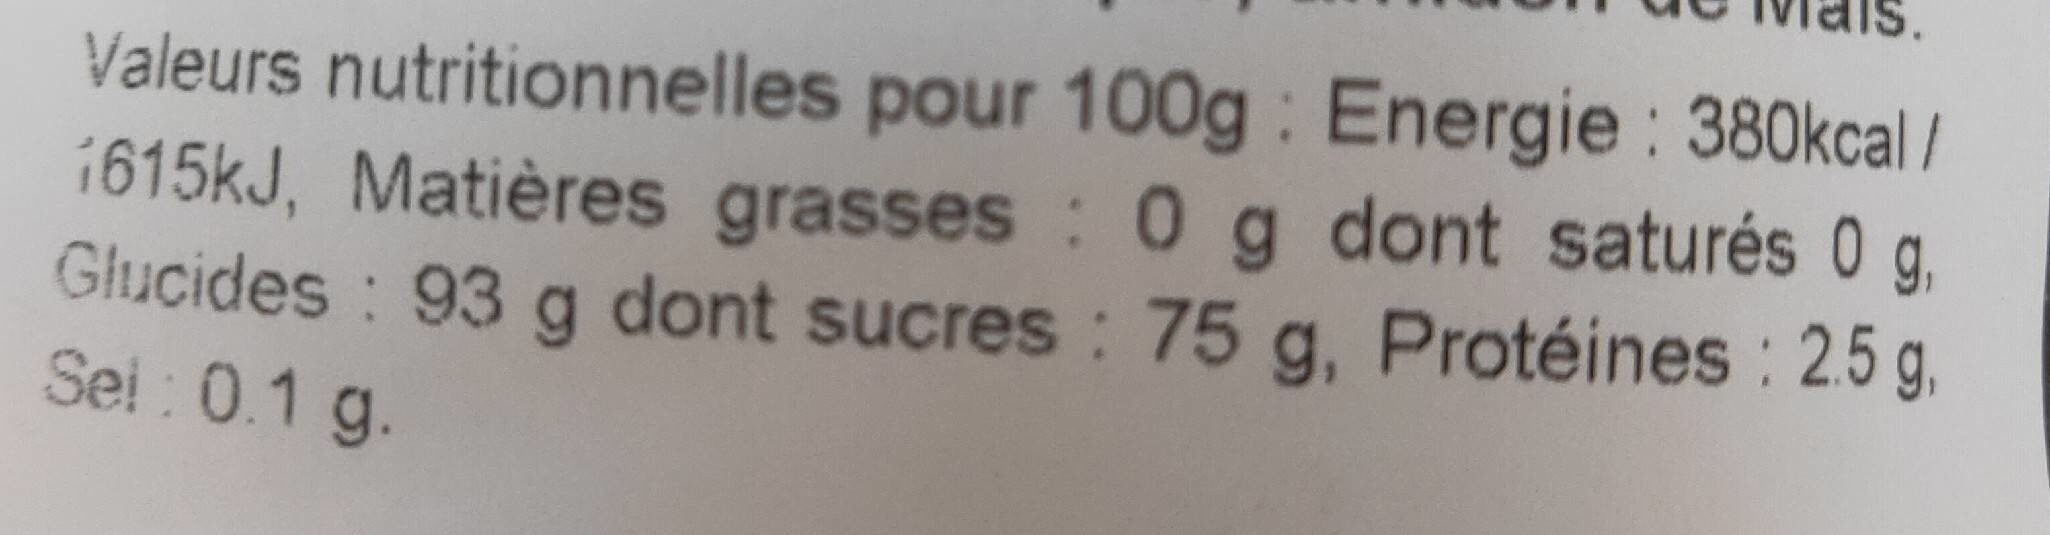 Sucralys - Nutrition facts - fr